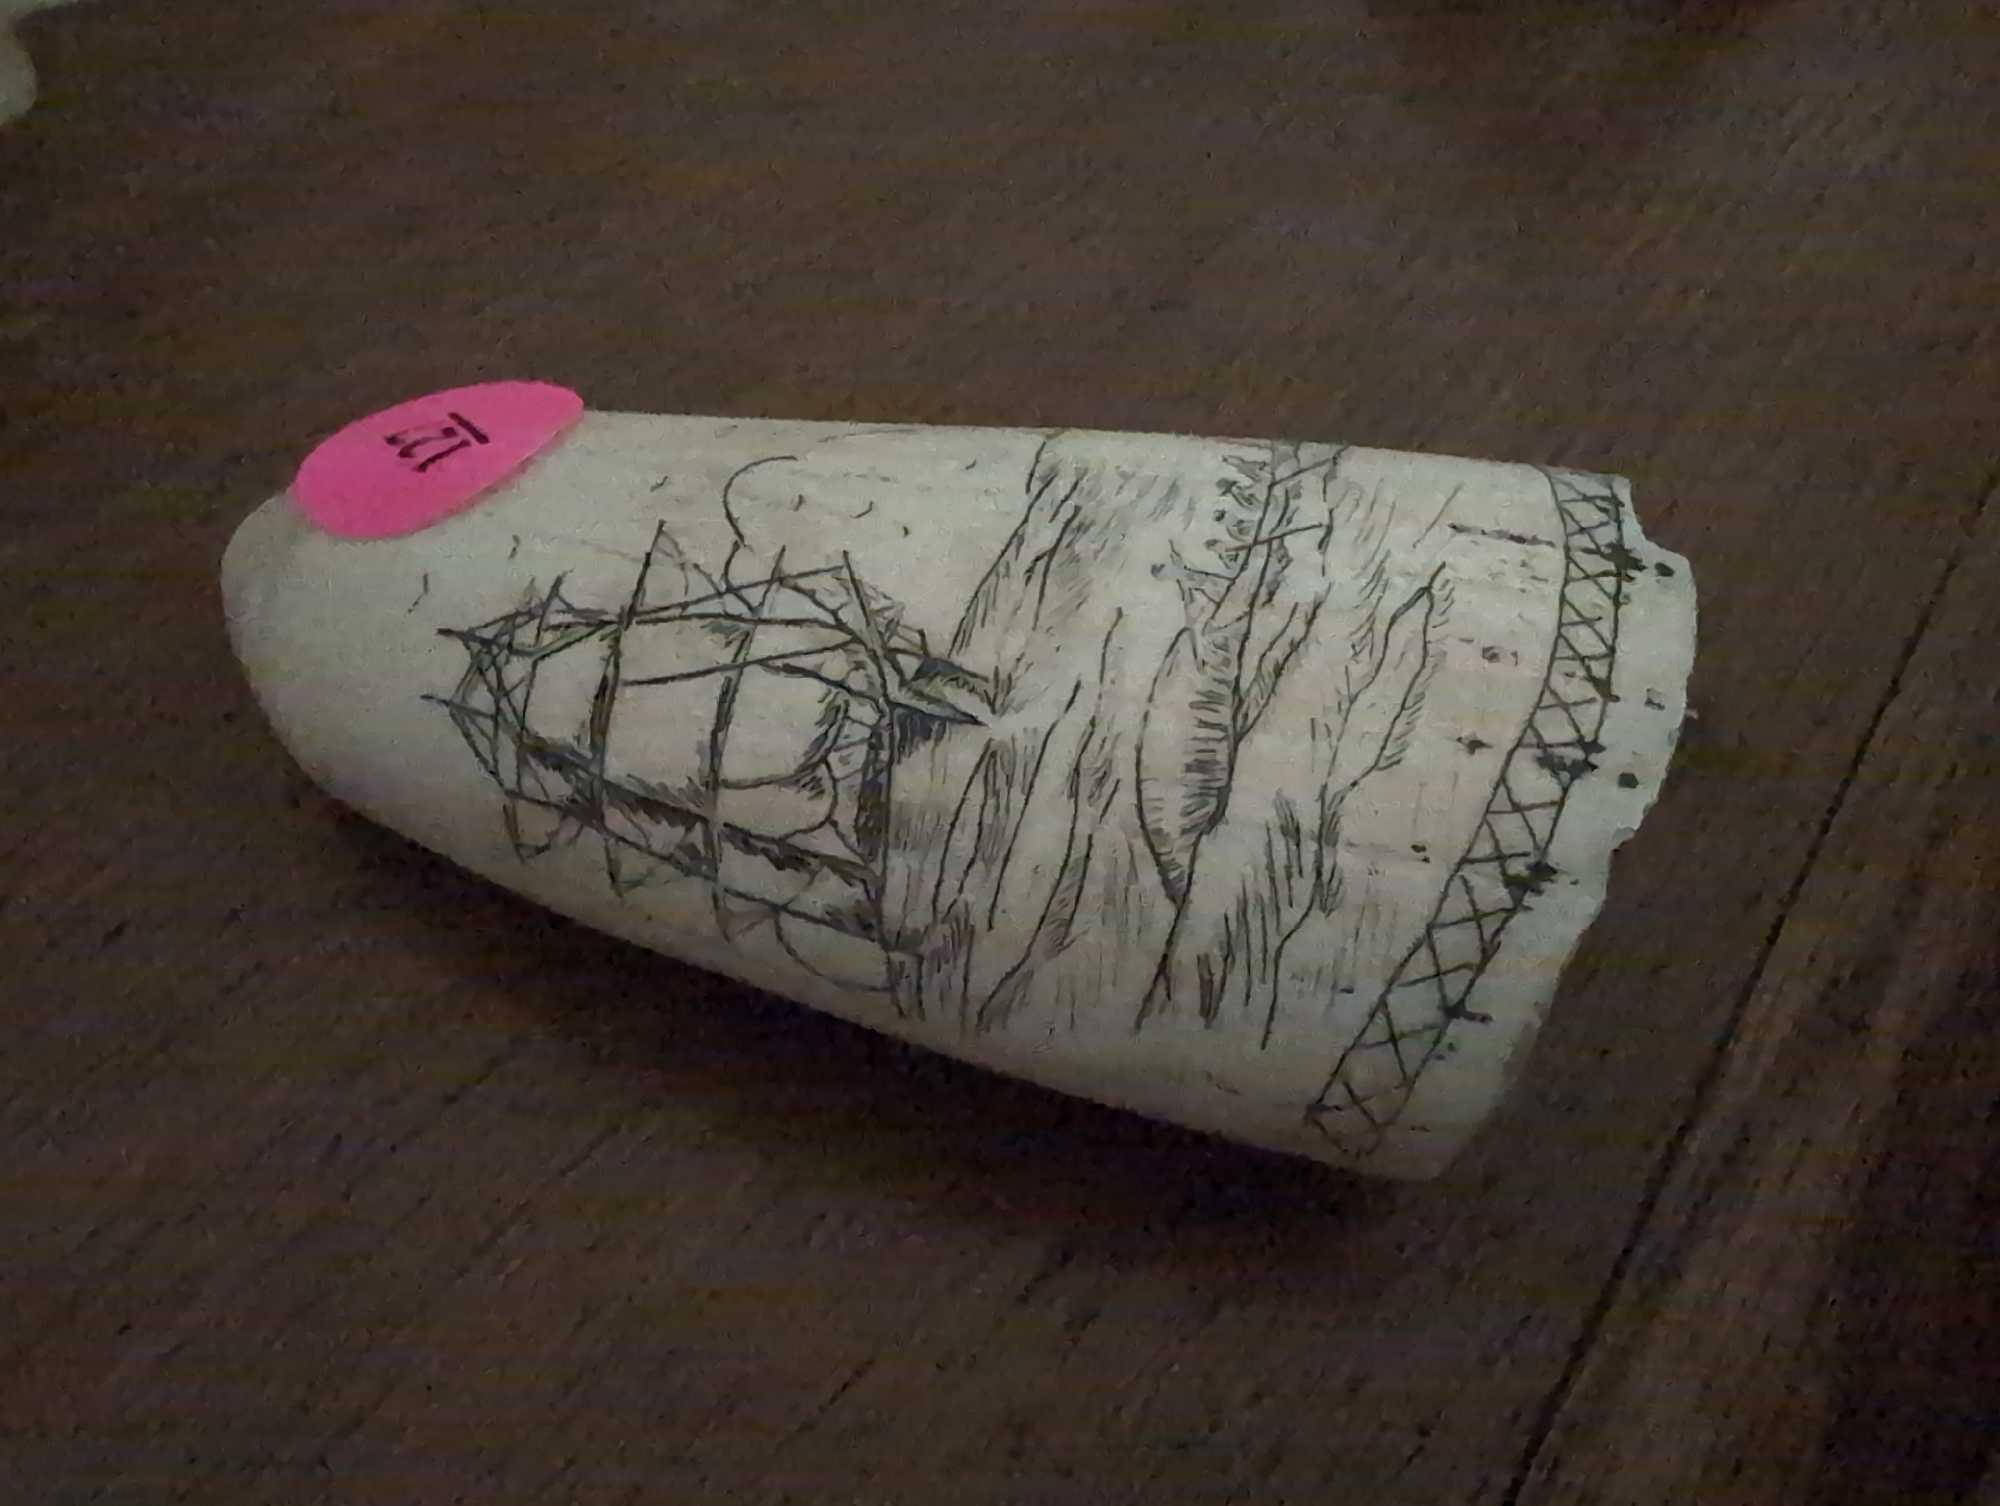 (LR) 2 PC. LOT TO INCLUDE A NOR CARVED SCRIMSHAW DEPICTING A SAILING SHIP, MARKED ON THE BACK "NOR"